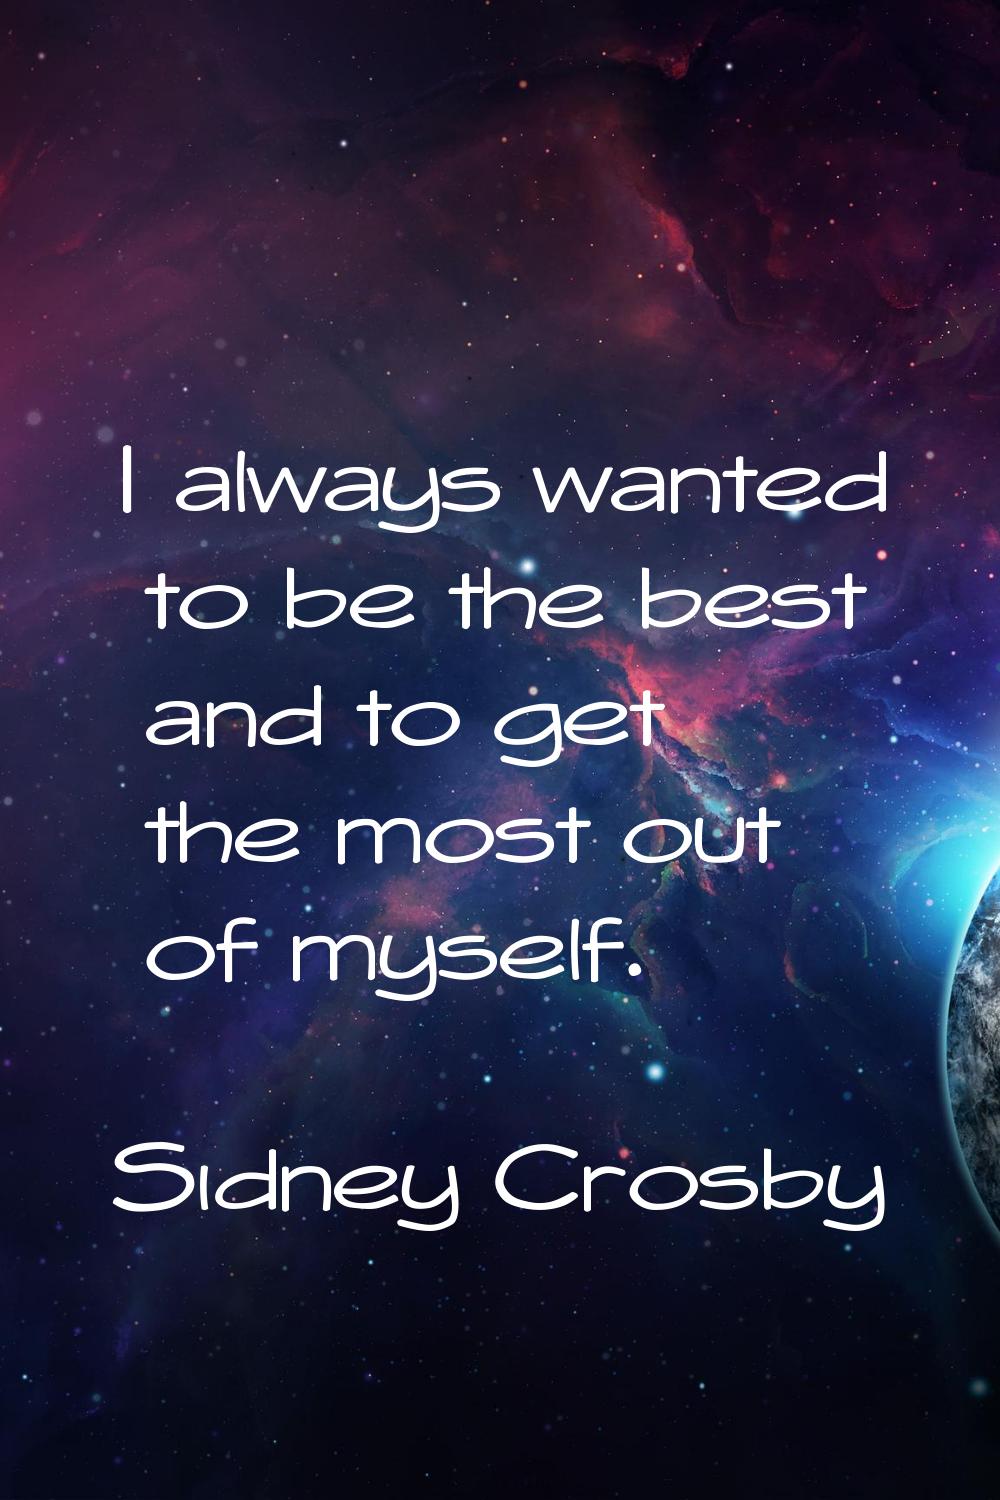 I always wanted to be the best and to get the most out of myself.